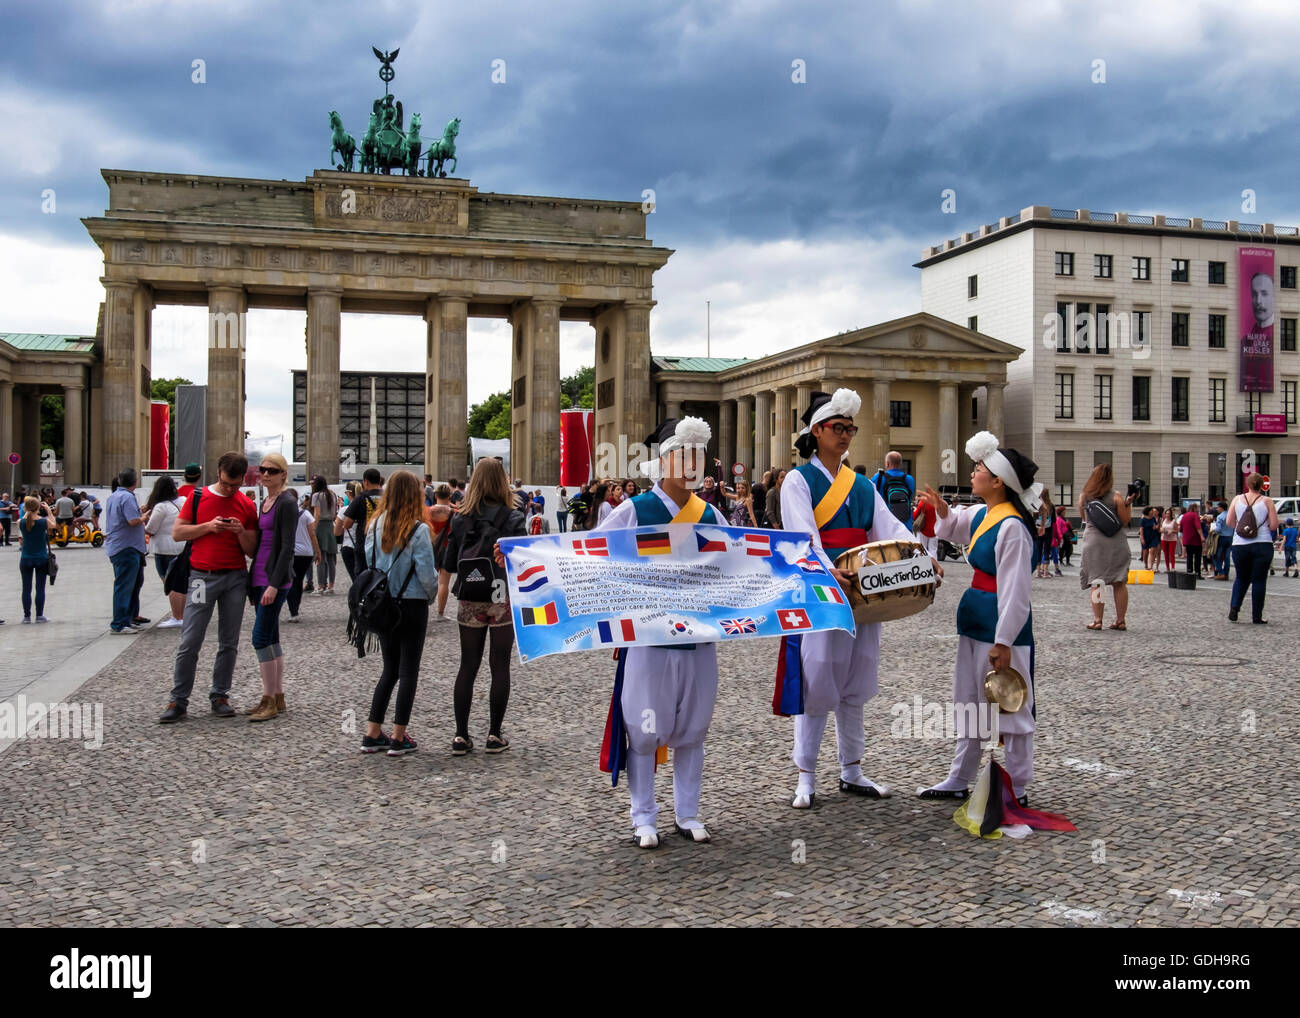 South Korean students perform traditional Pungmul dance to raise funds on school tour of Europe, Brandenburg Gate, Mitte, Berlin Stock Photo